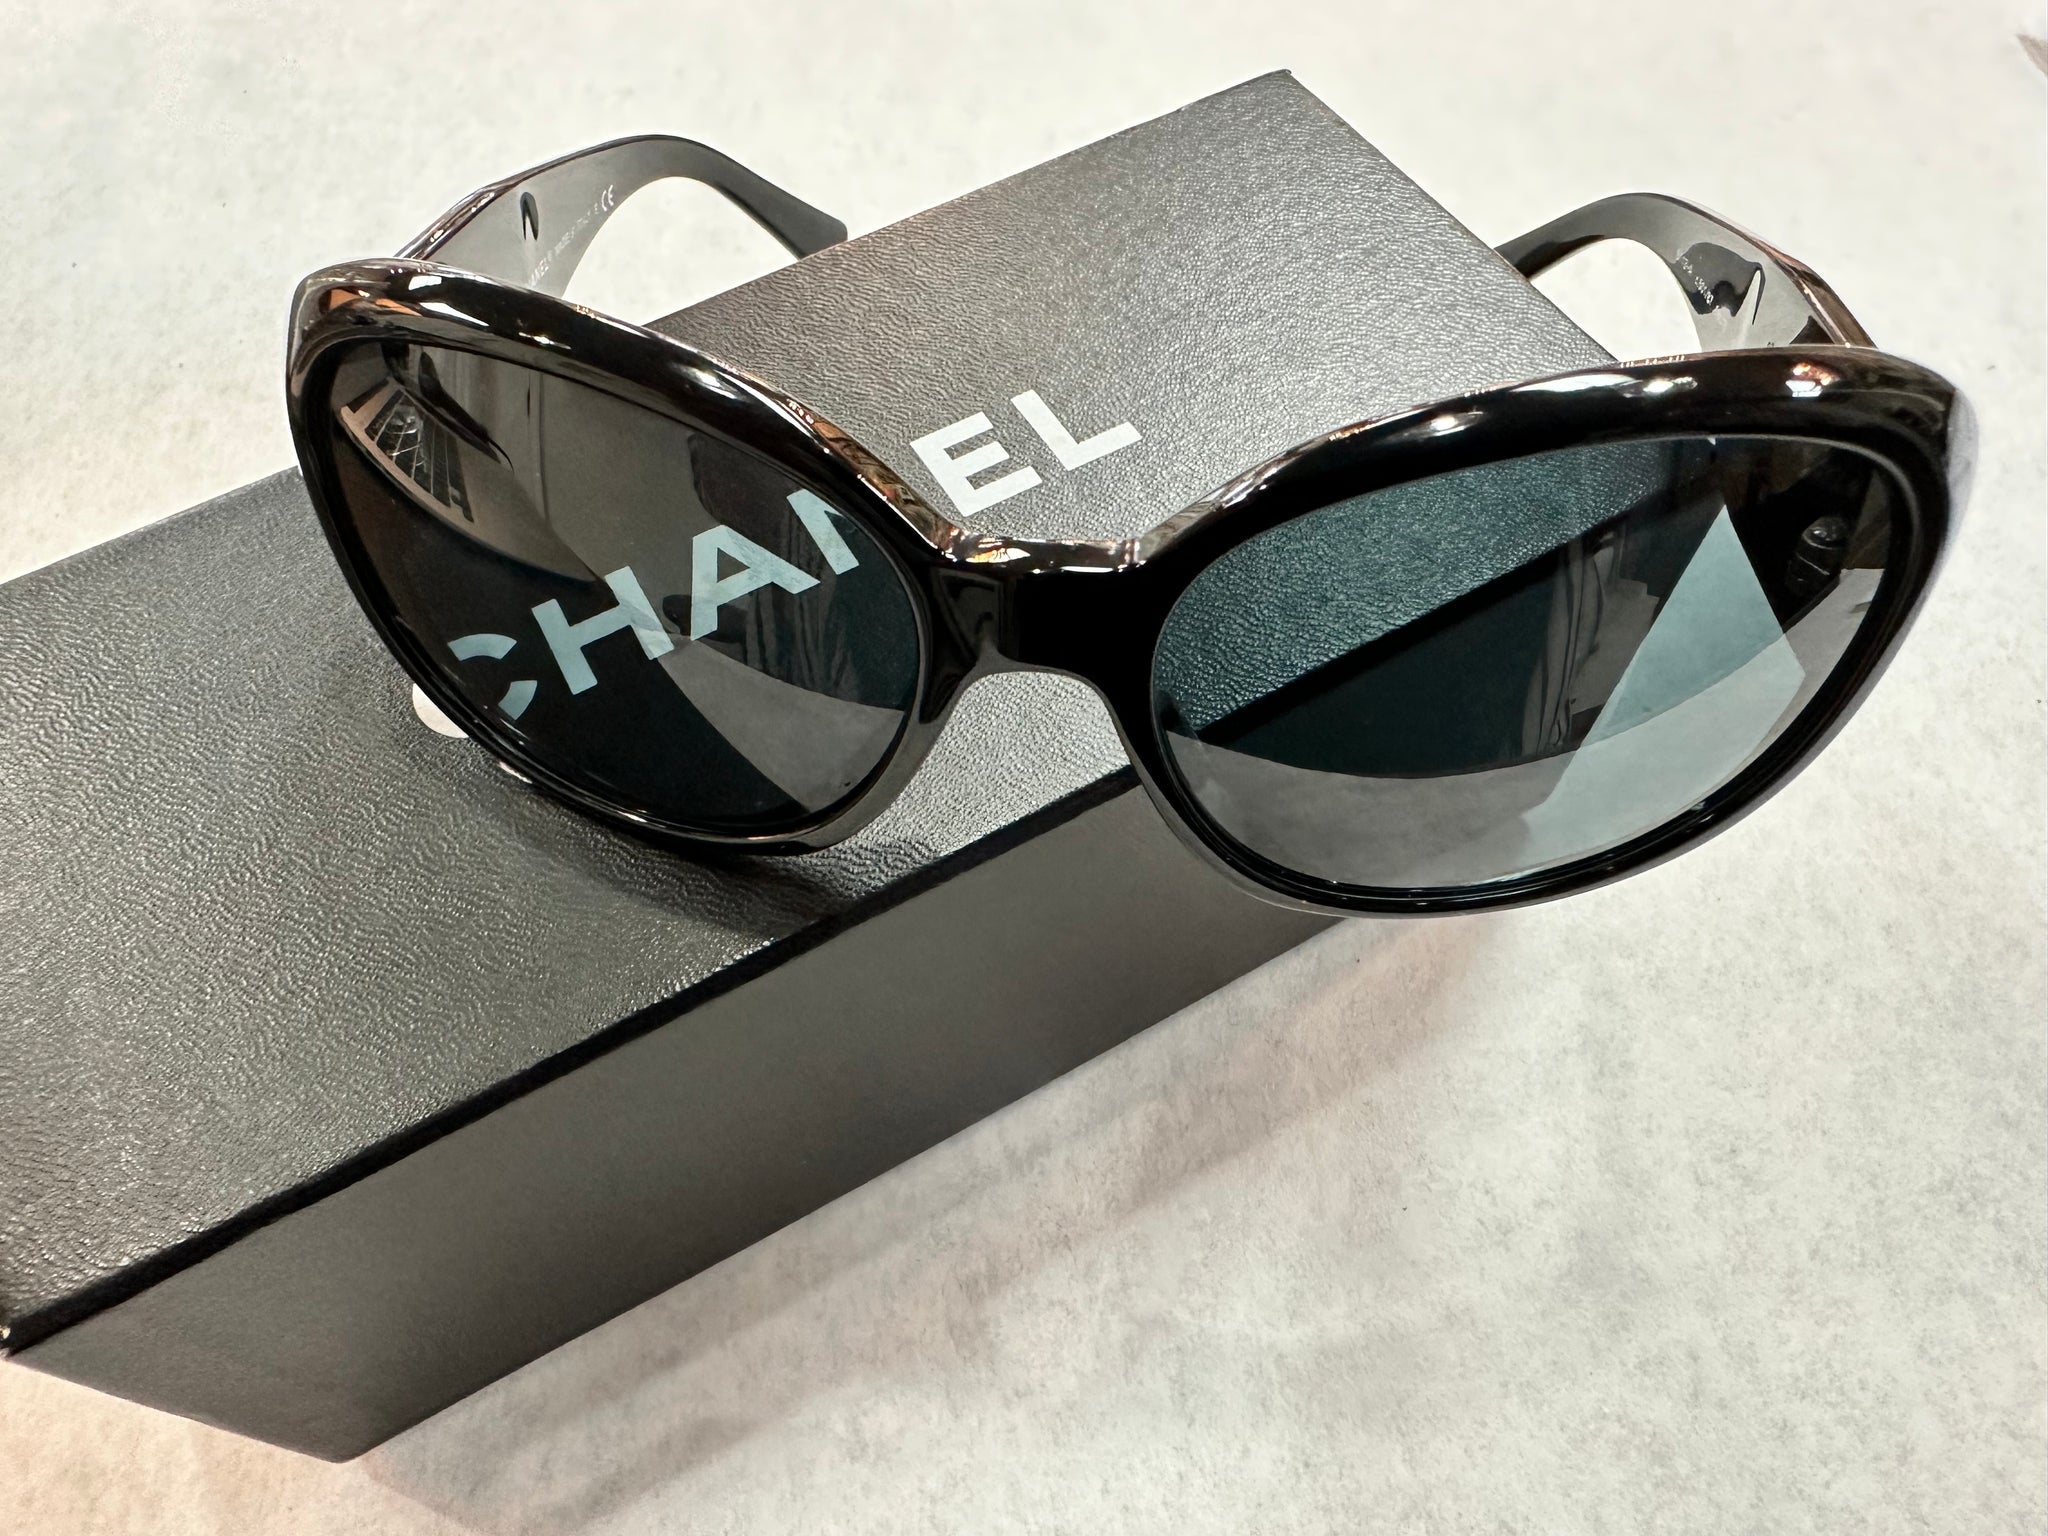 CHANEL sunglasses - Limited Edition - CH5318Q C501S8 - Black - Camellia  Flowers